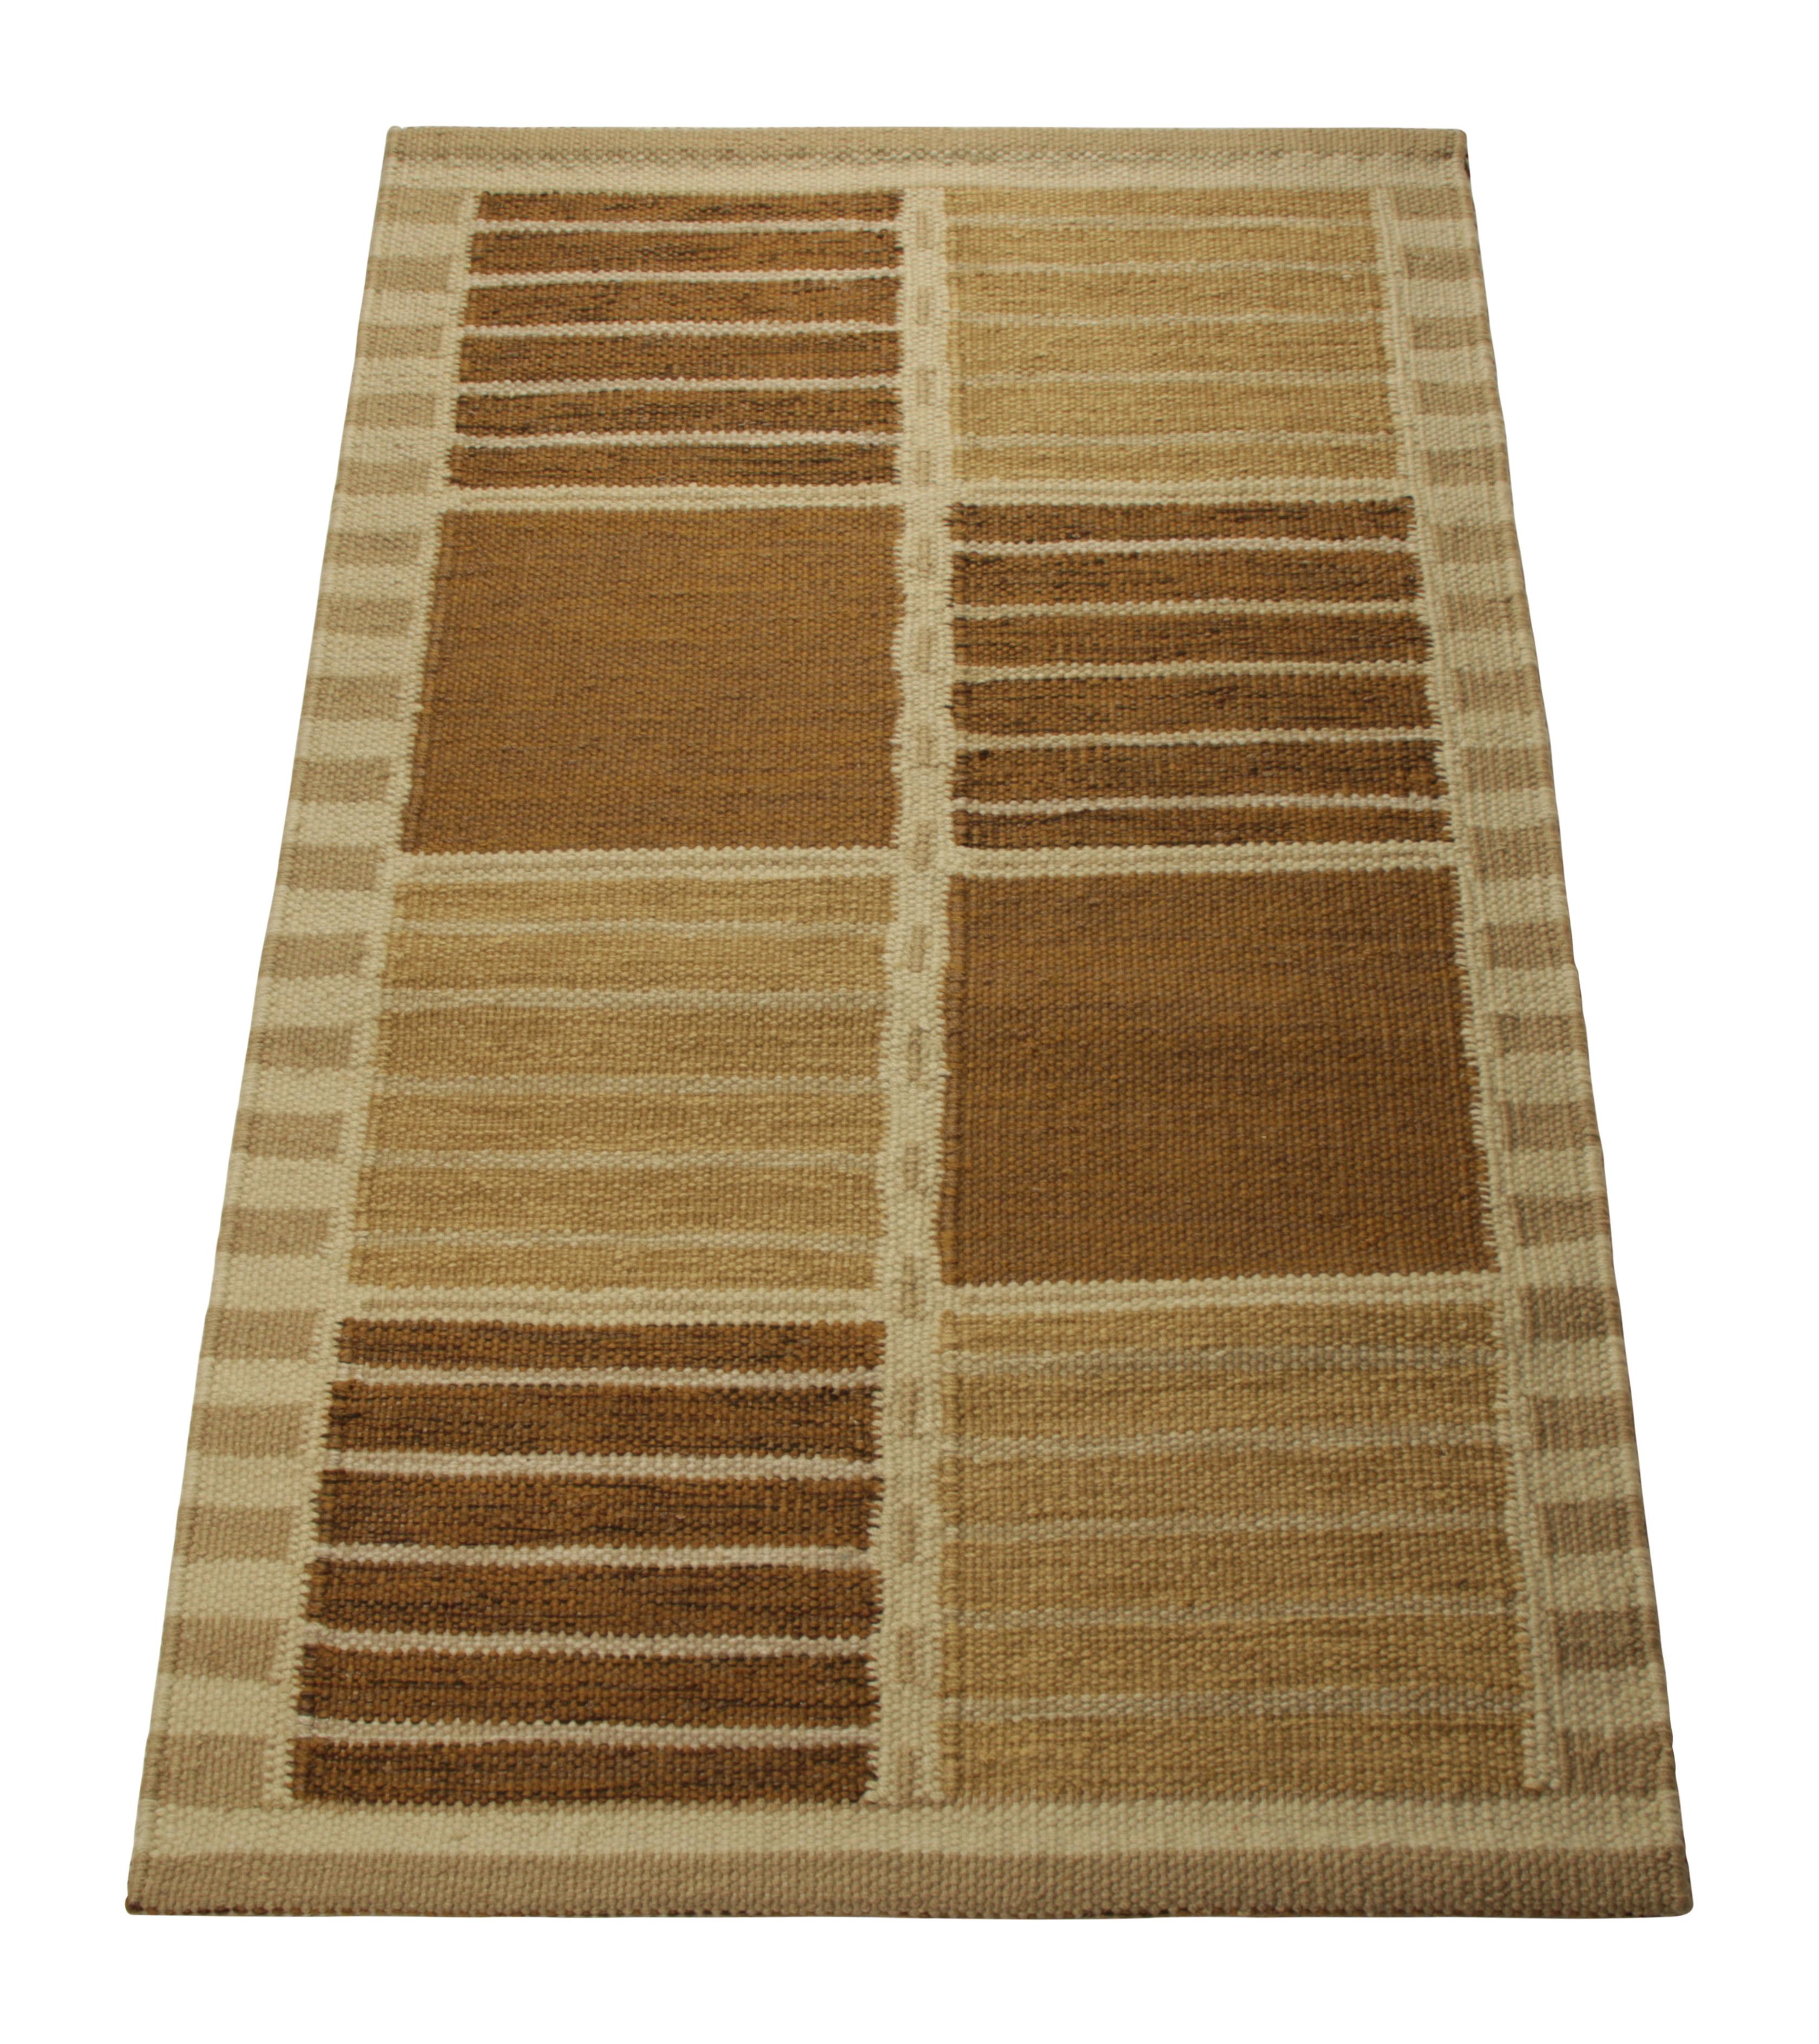 Indian Rug & Kilim’s Scandinavian Style Rug in Beige-Brown, with Geometric Stripes For Sale